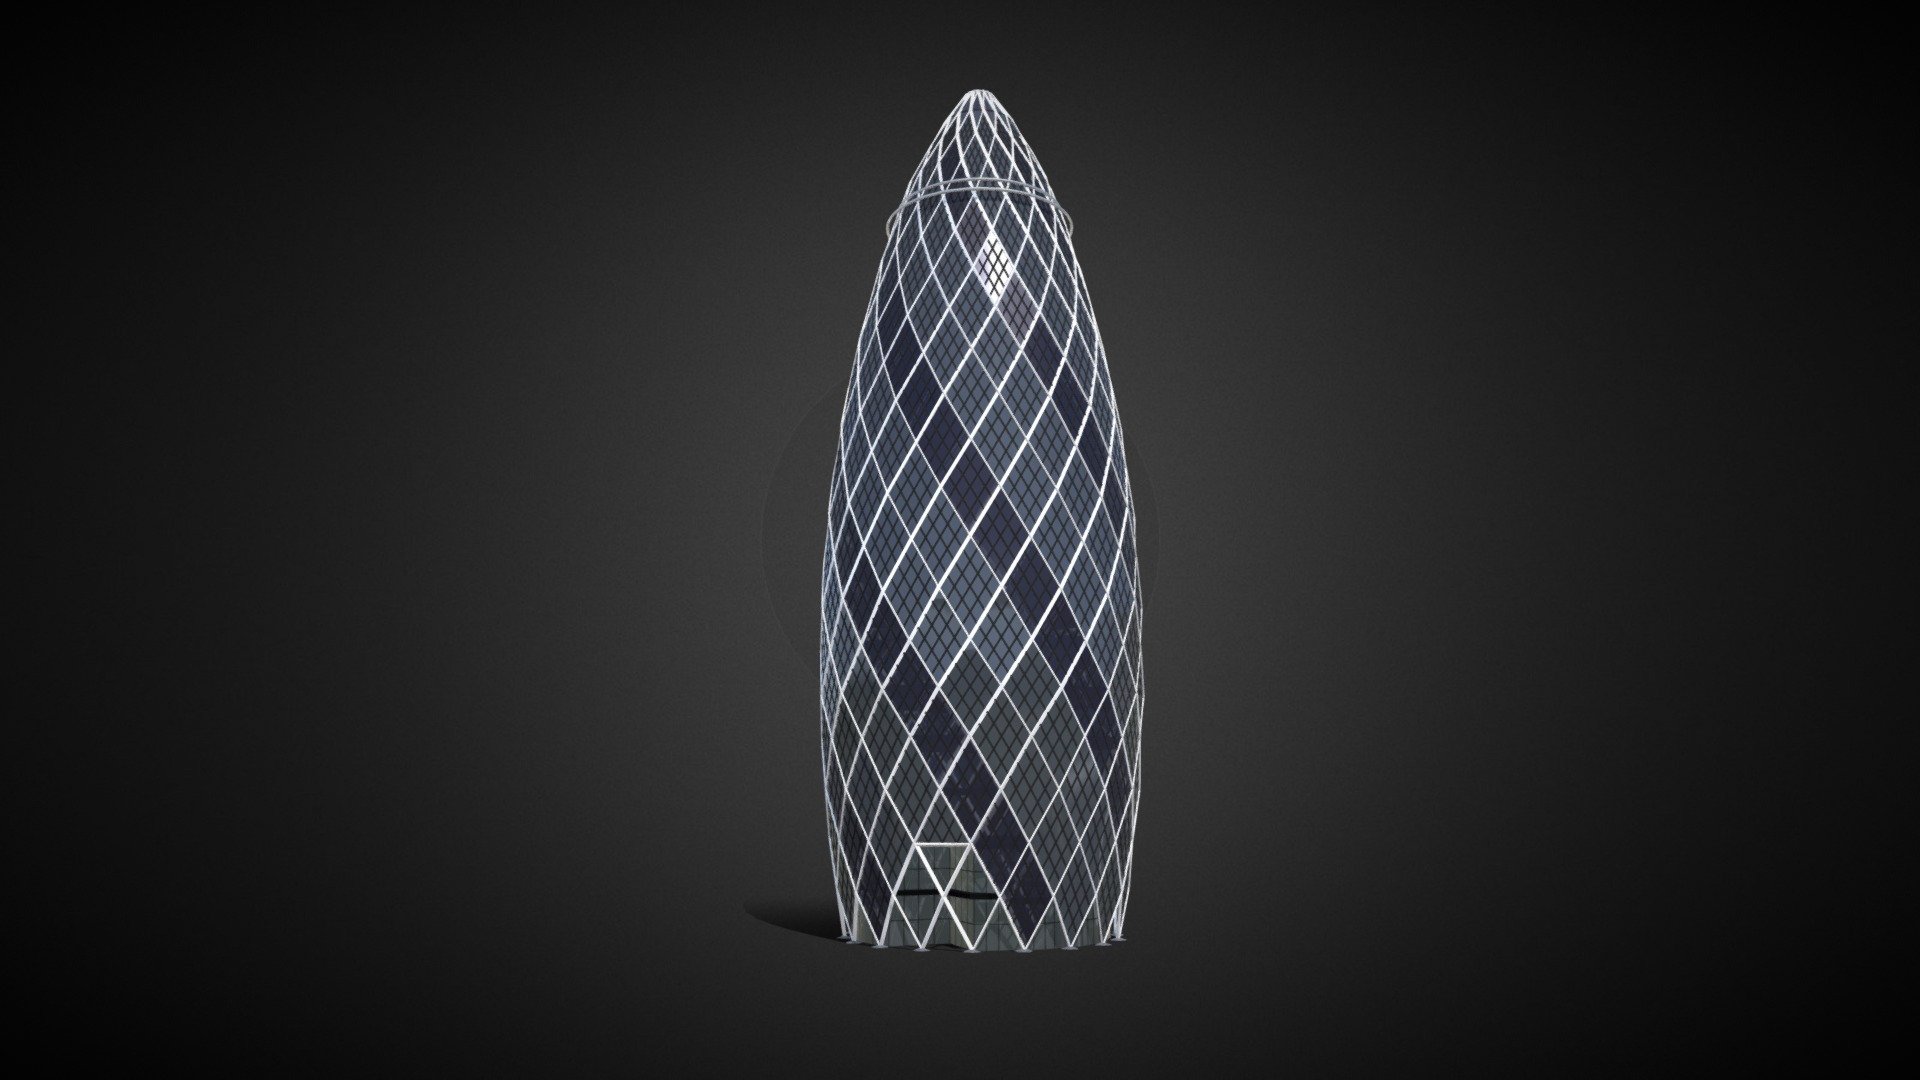 Here is a 3d model of The Gherkin also know as 30 St Mary Axe, It is a commercial skyscraper in London's primary financial district, the City of London 3d model